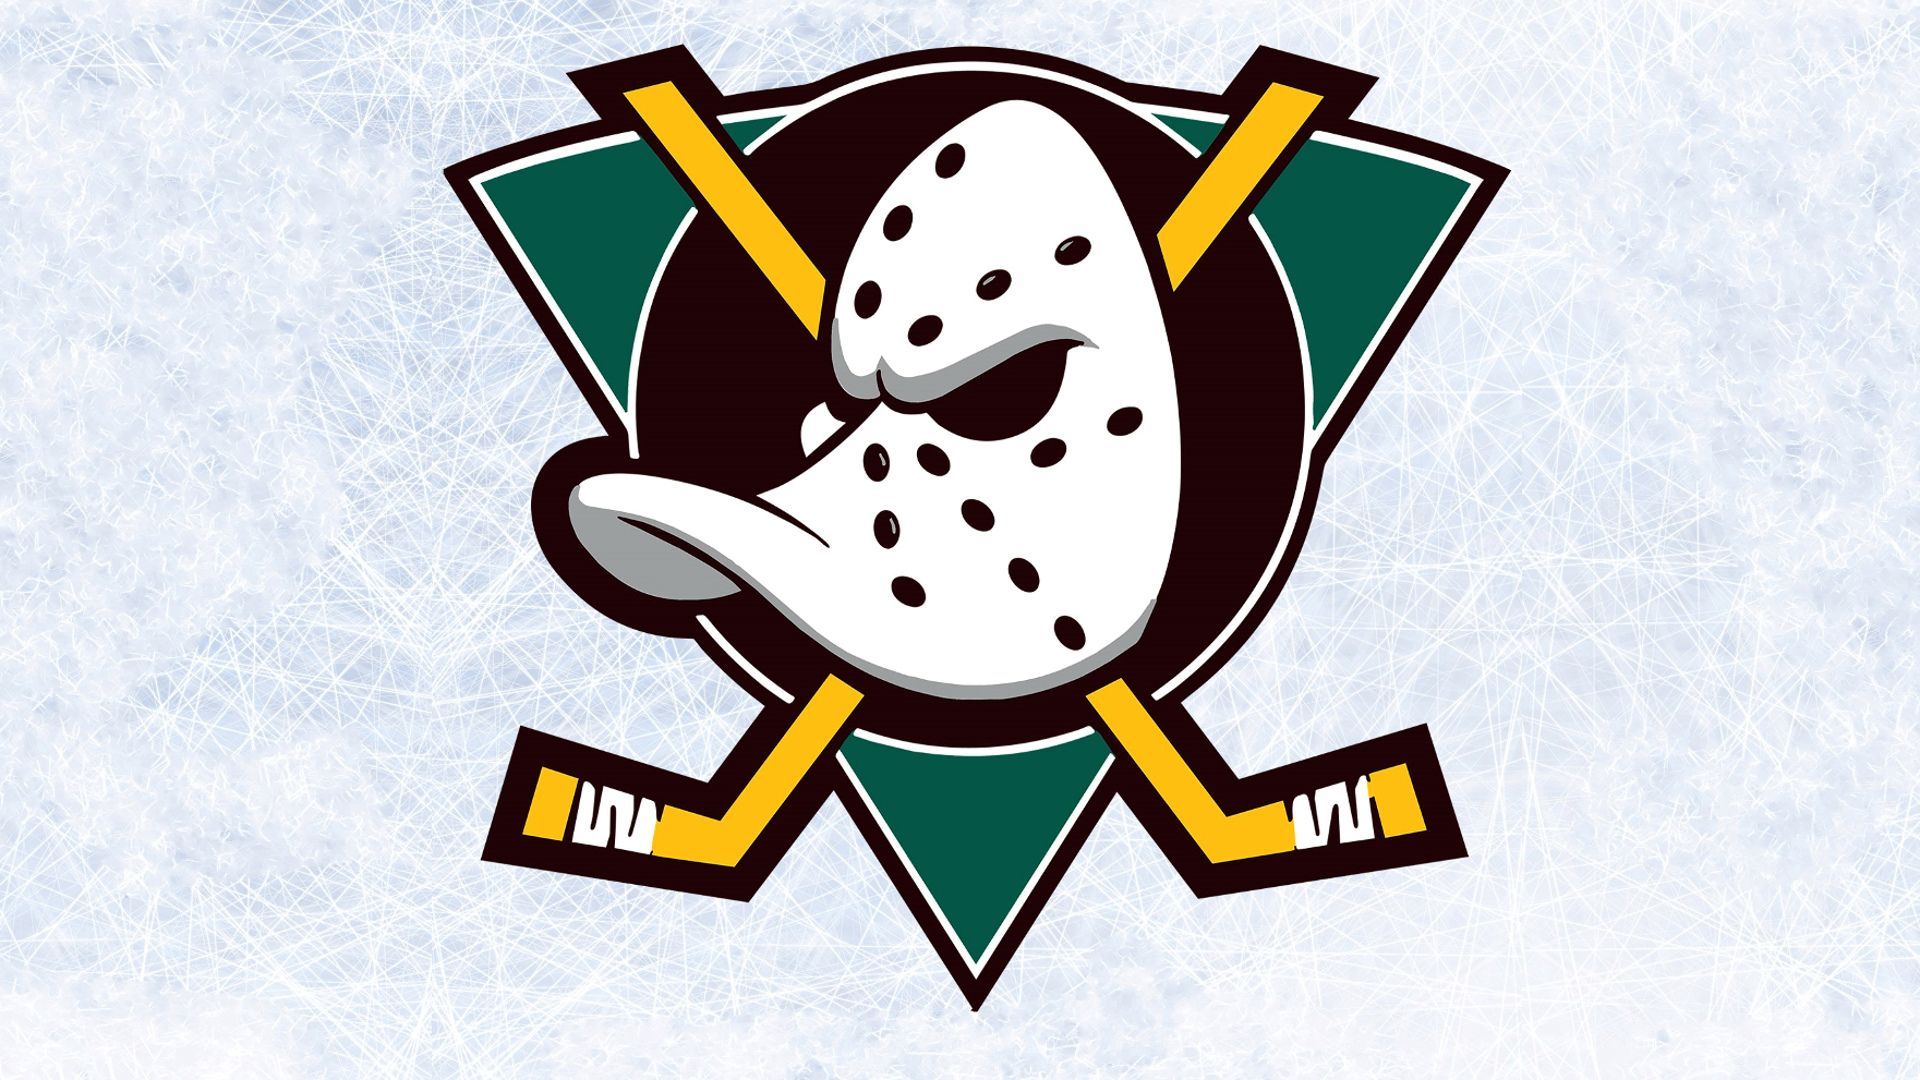 The Mighty Ducks background